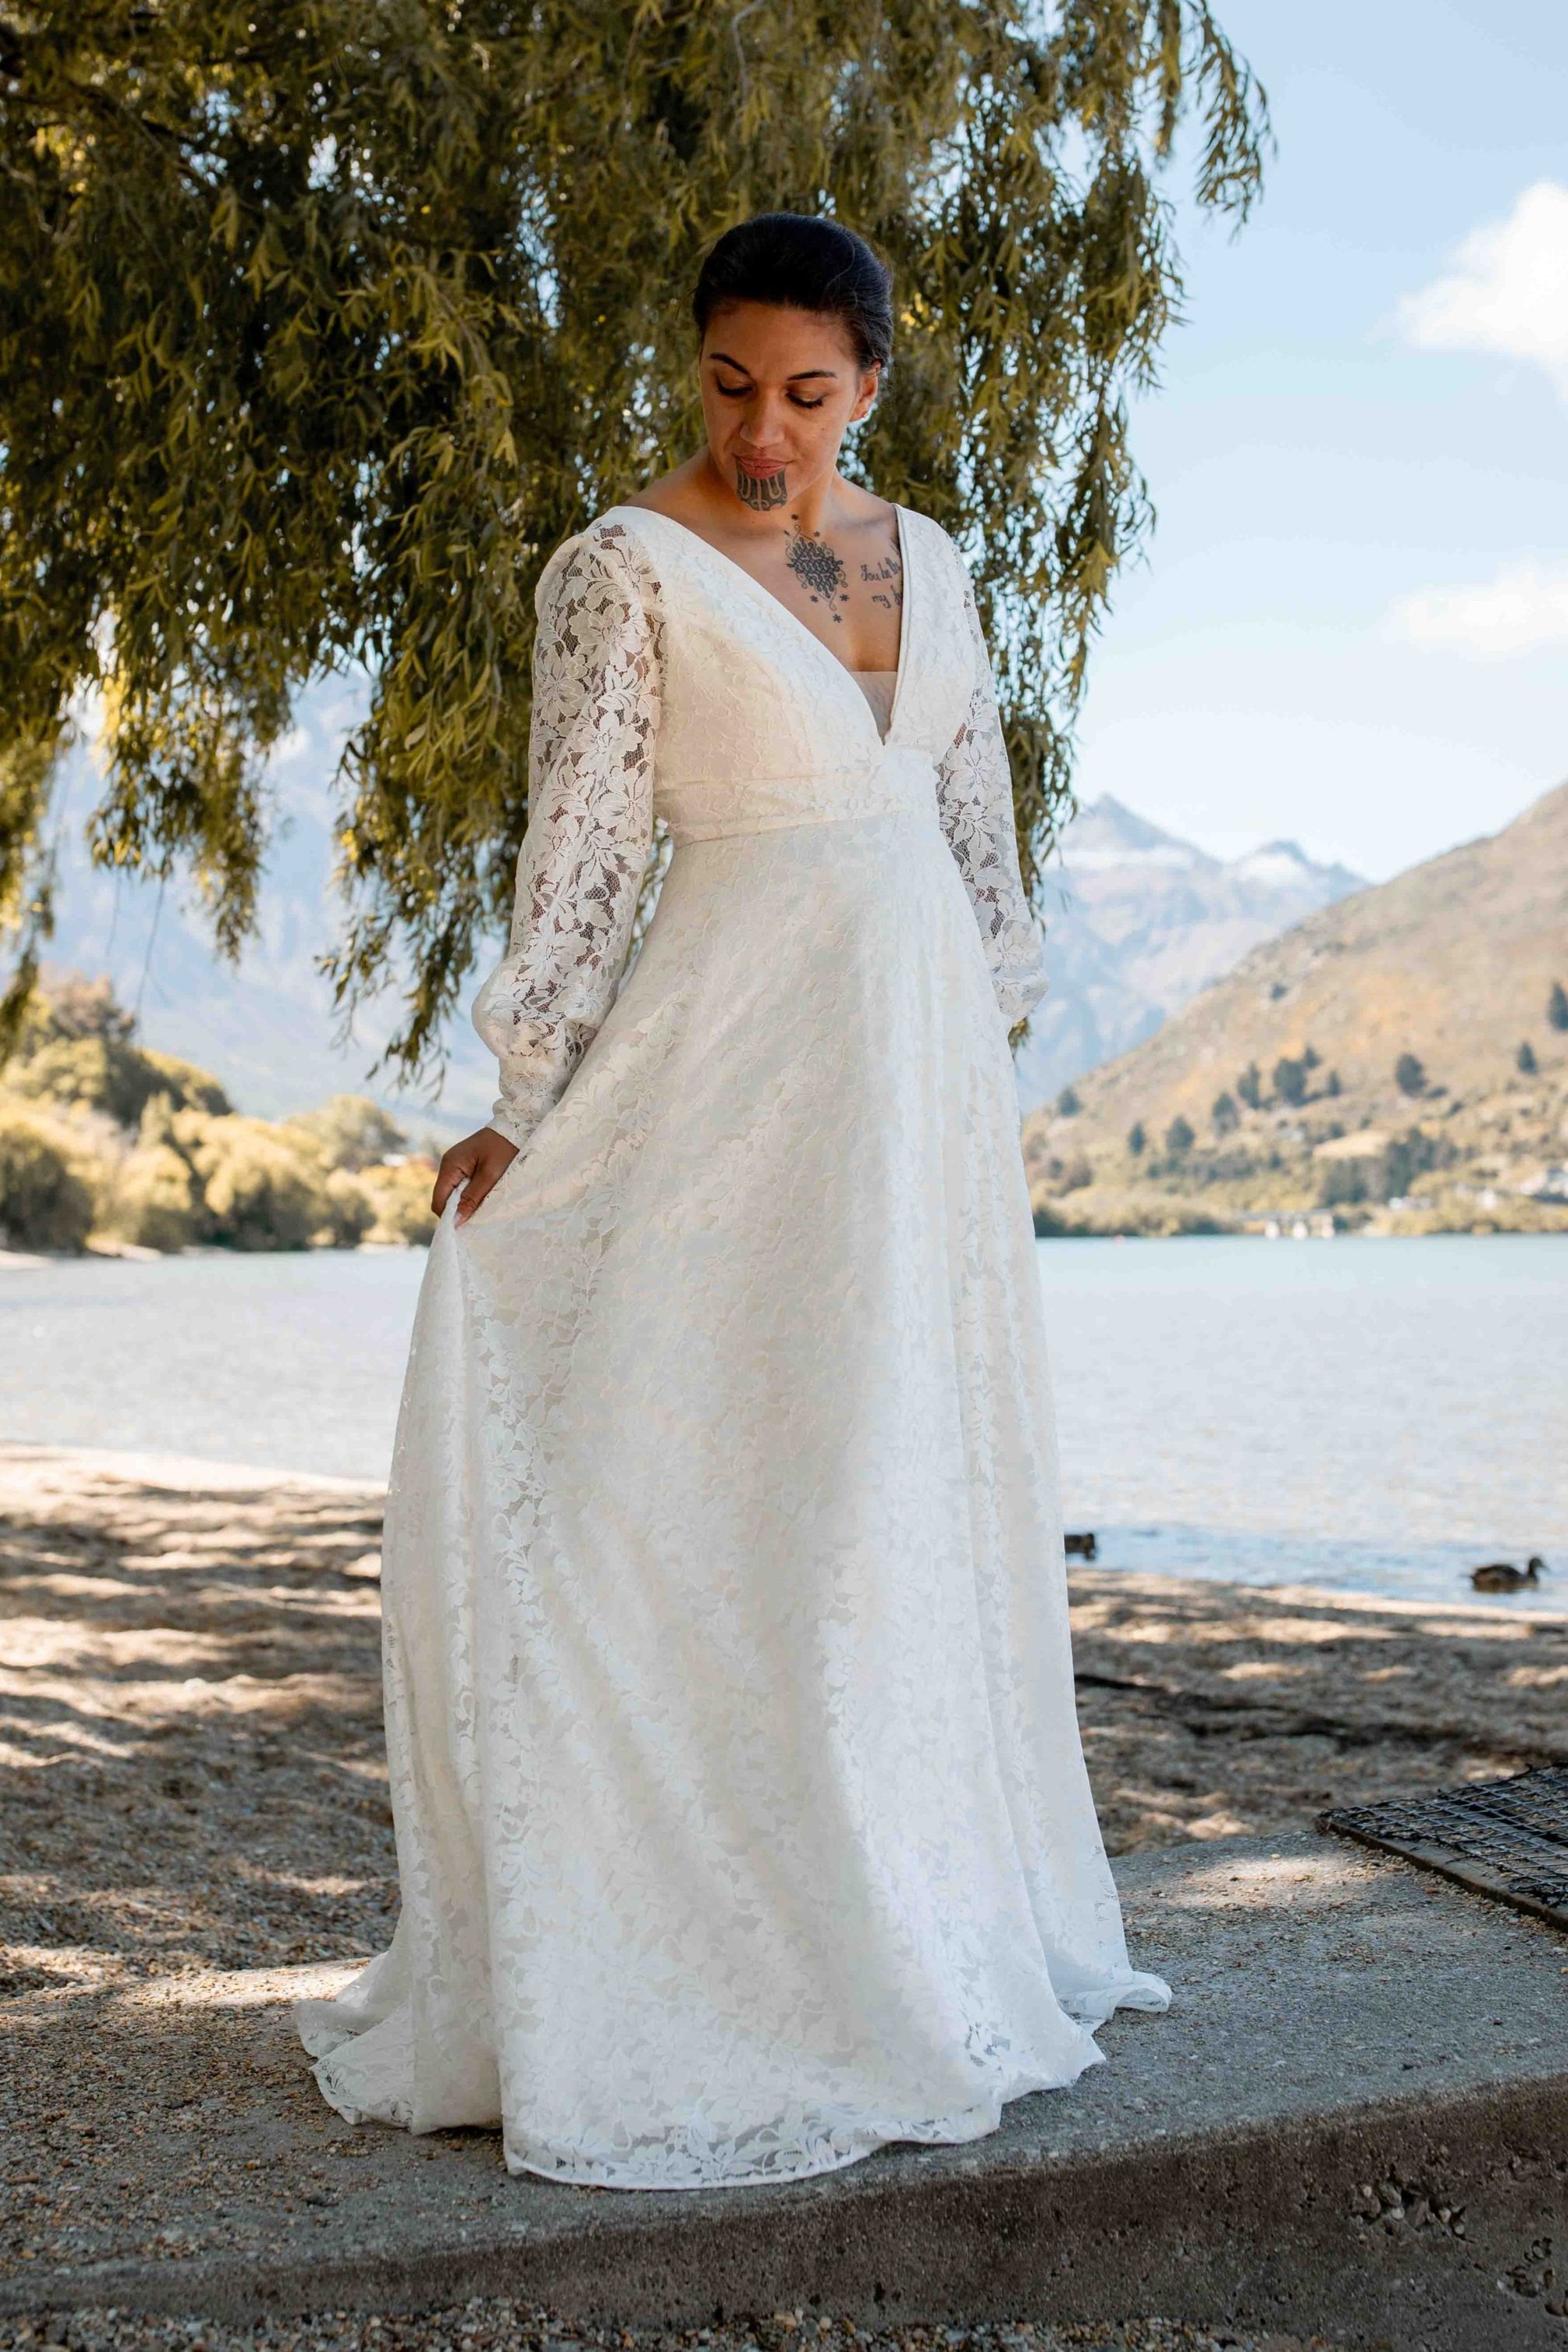 Madonna+Lace+Overlay+-+Nemo+Bridal+Couture+Queenstown+New+Zealand+0V9A3075.jpg